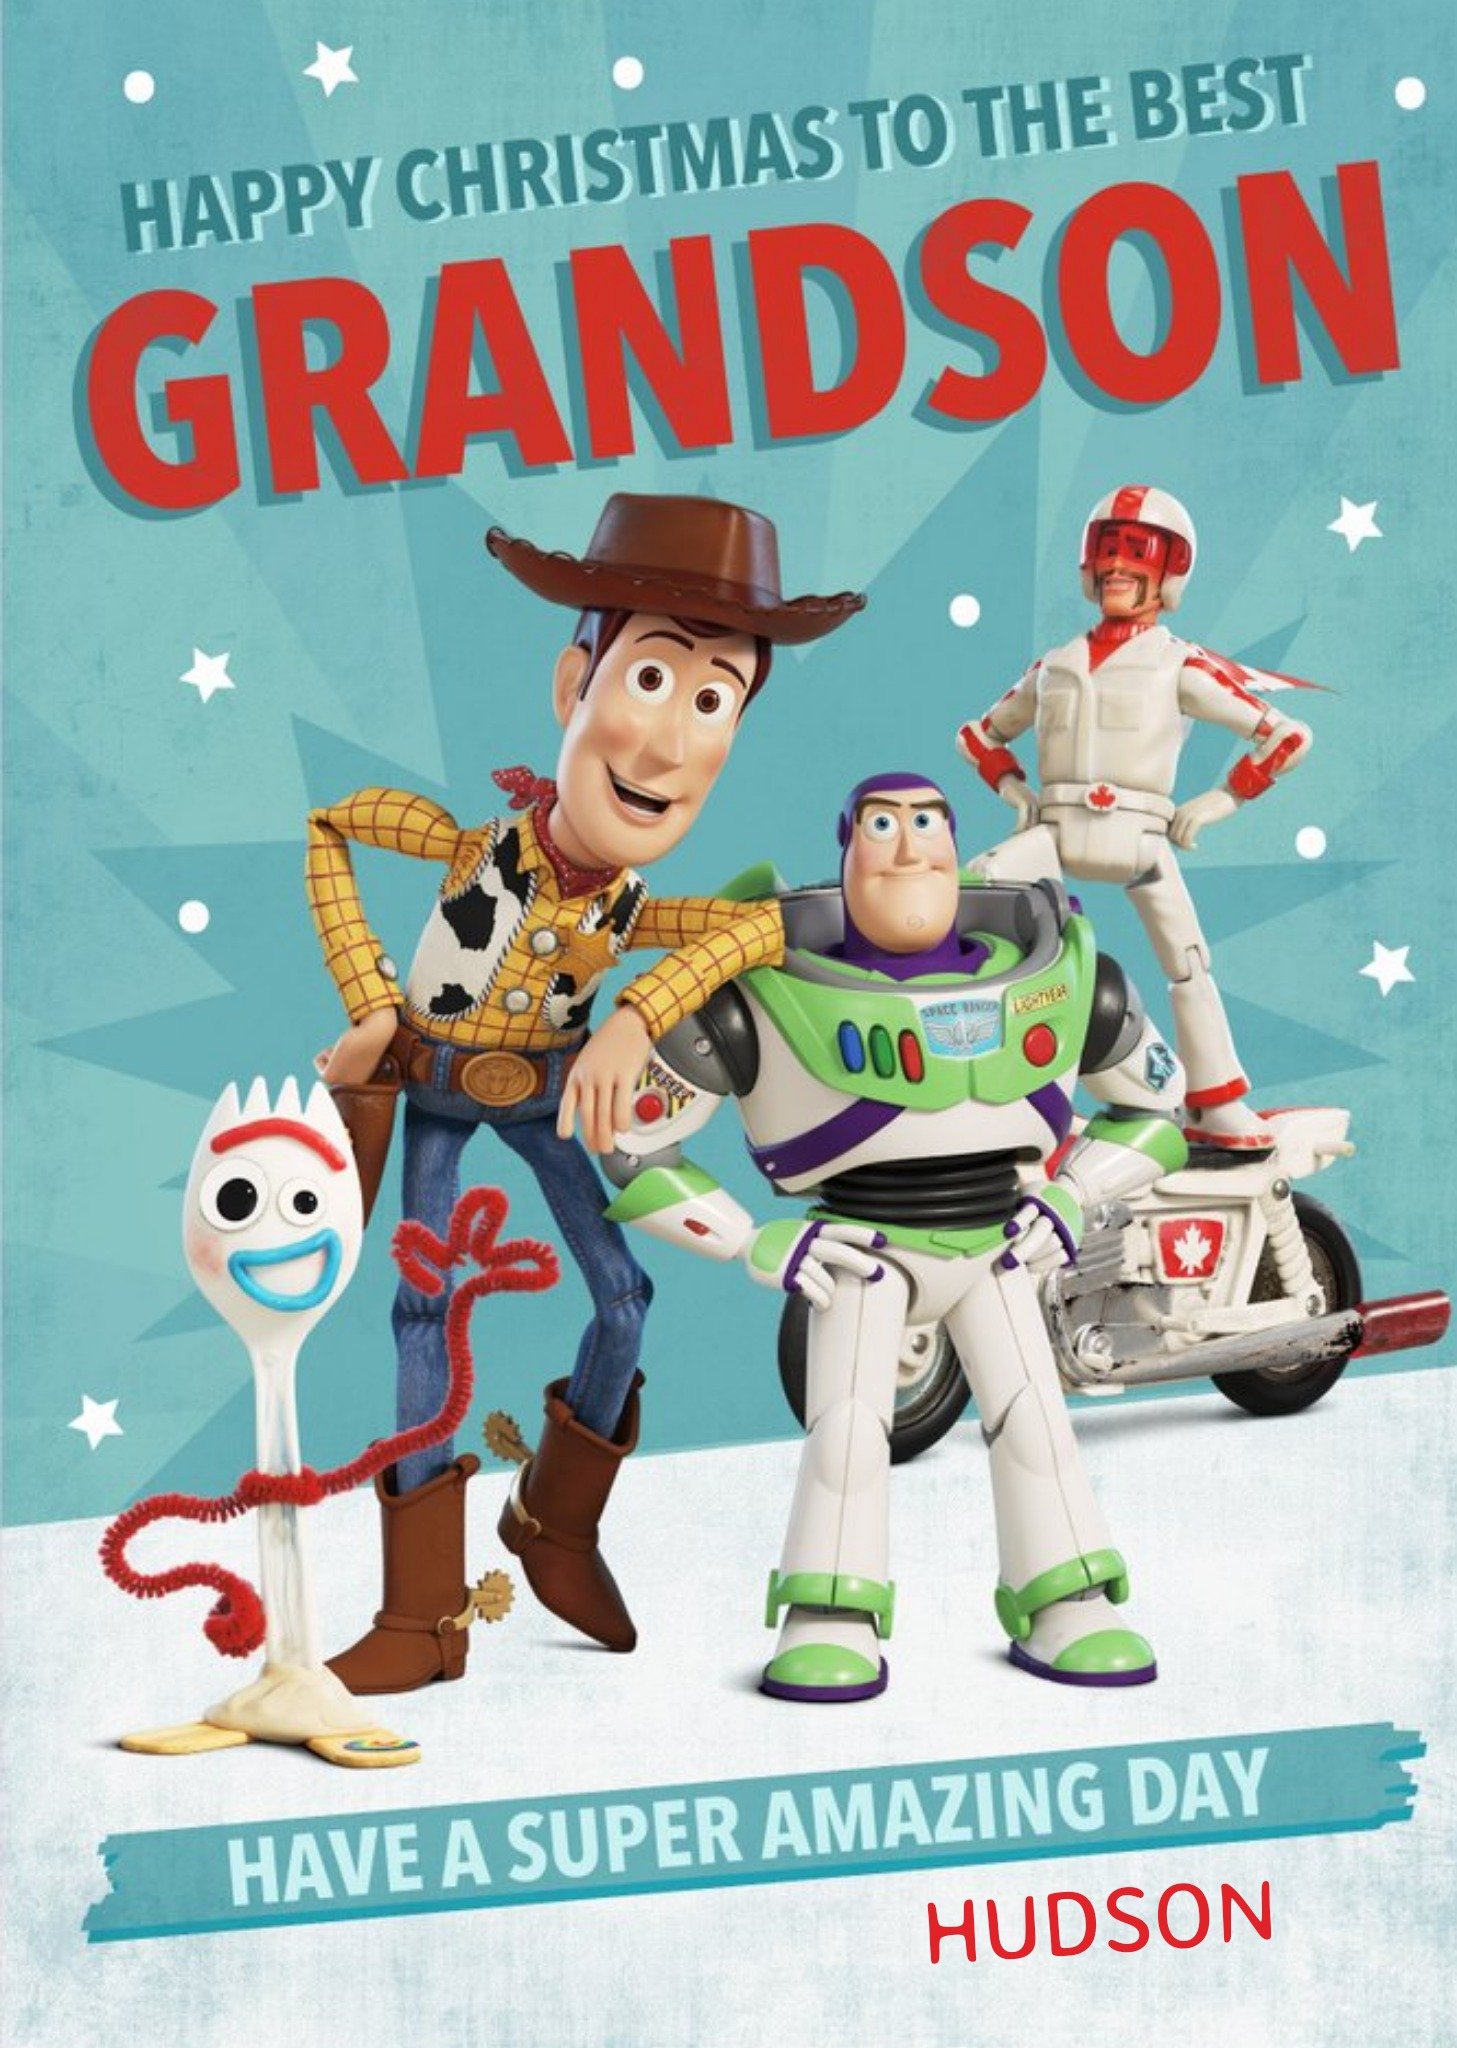 Disney Toy Story 4 Characters Christmas Cards To The Best Grandson Ecard